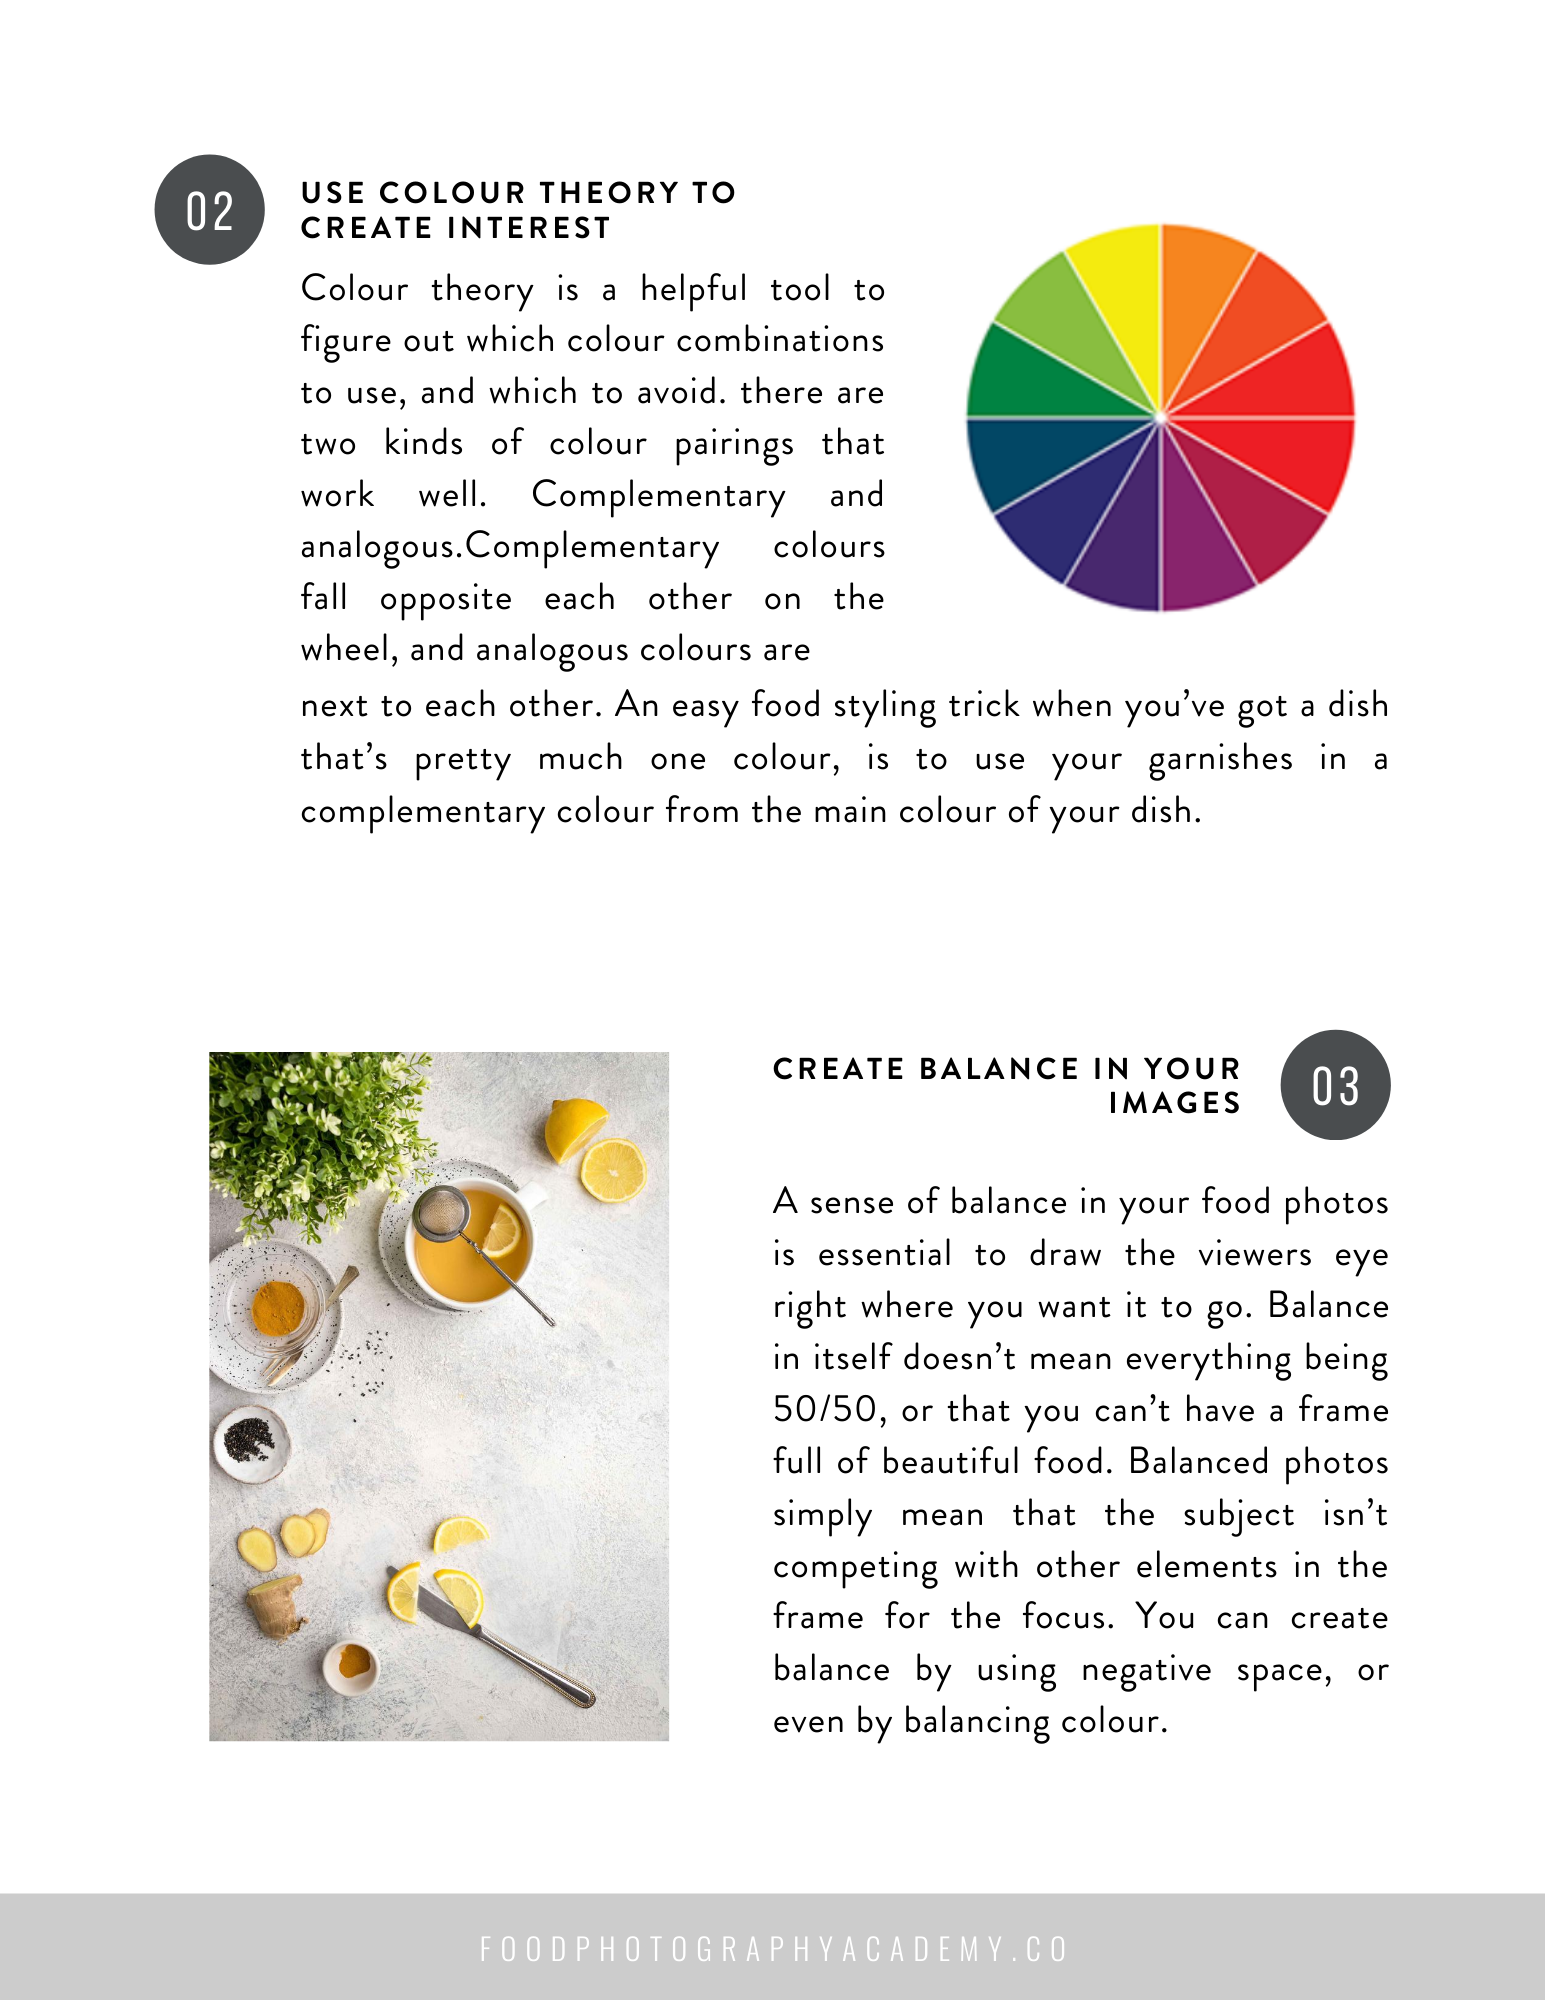 colour theory and composition tips for food photos